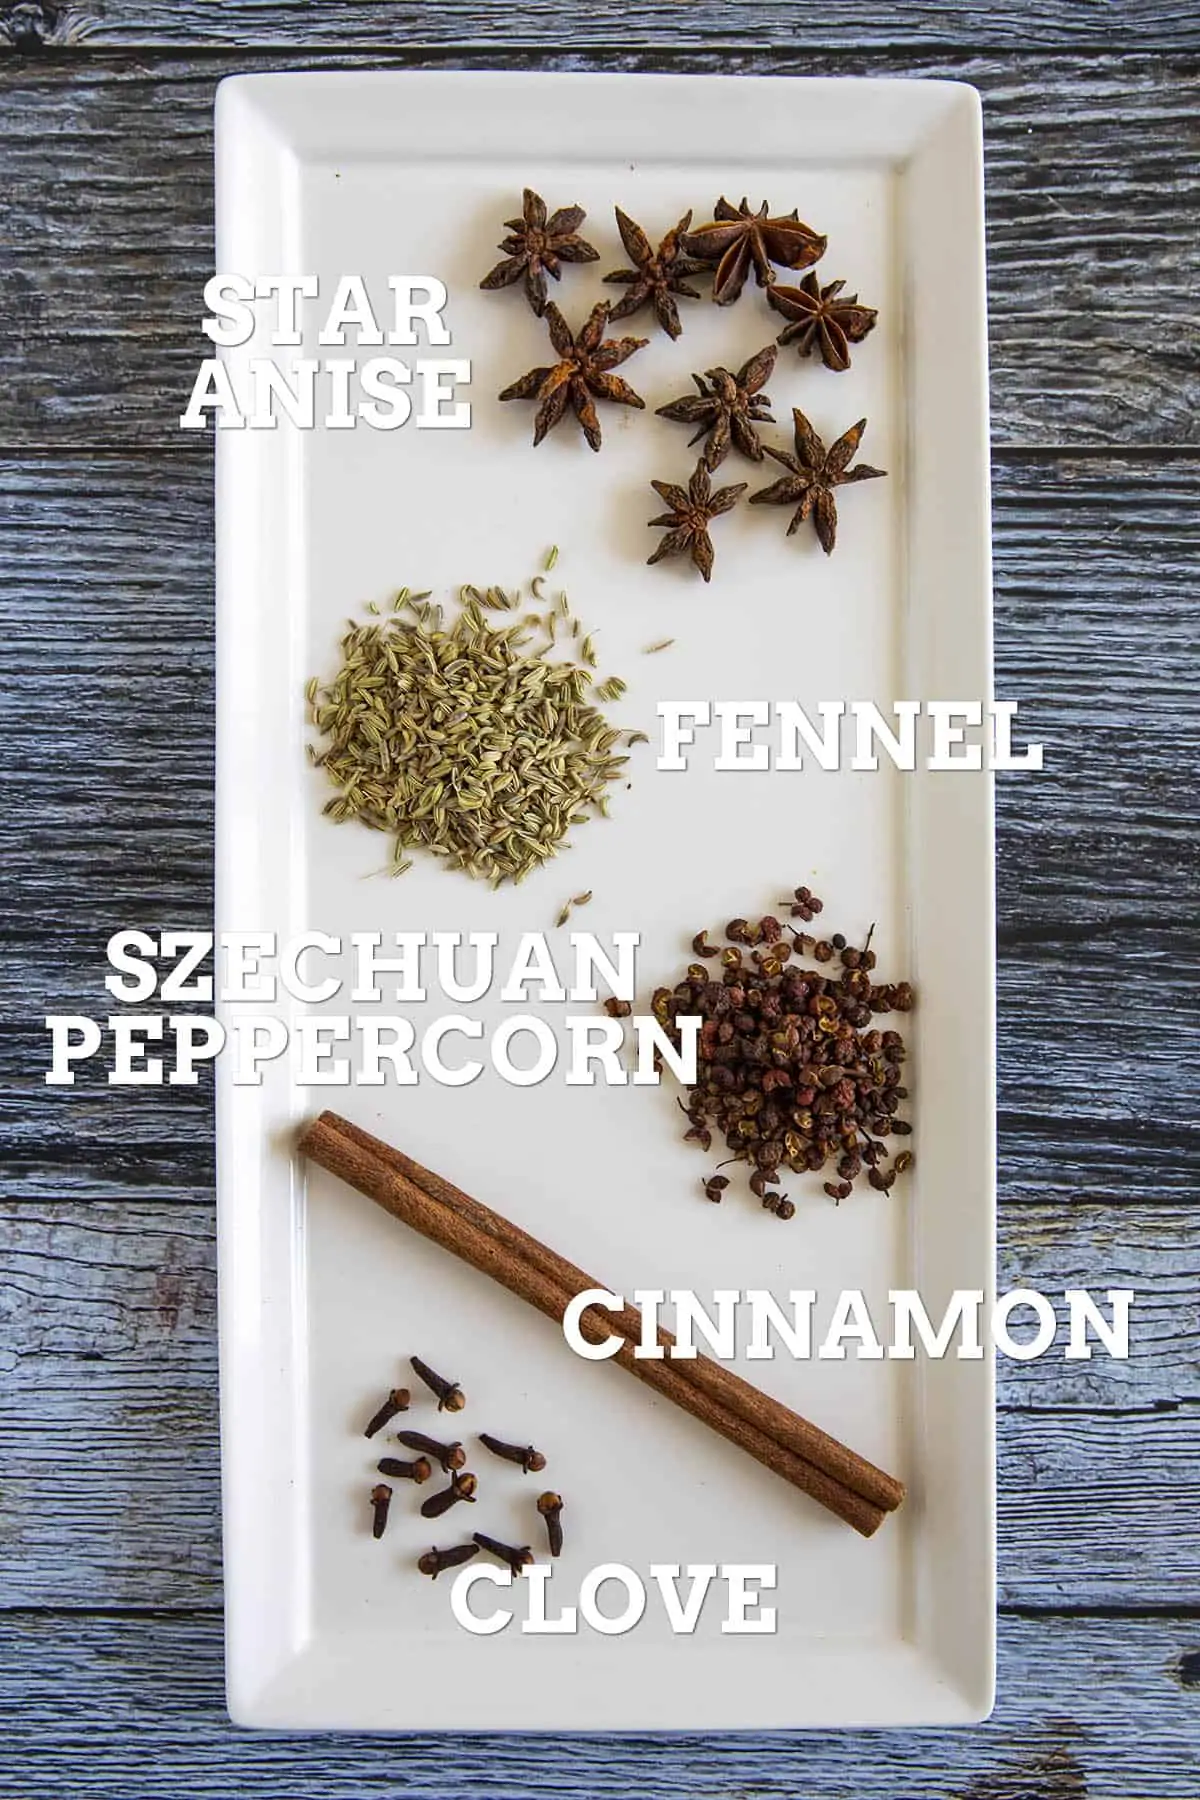 Chinese 5 Spice ingredients